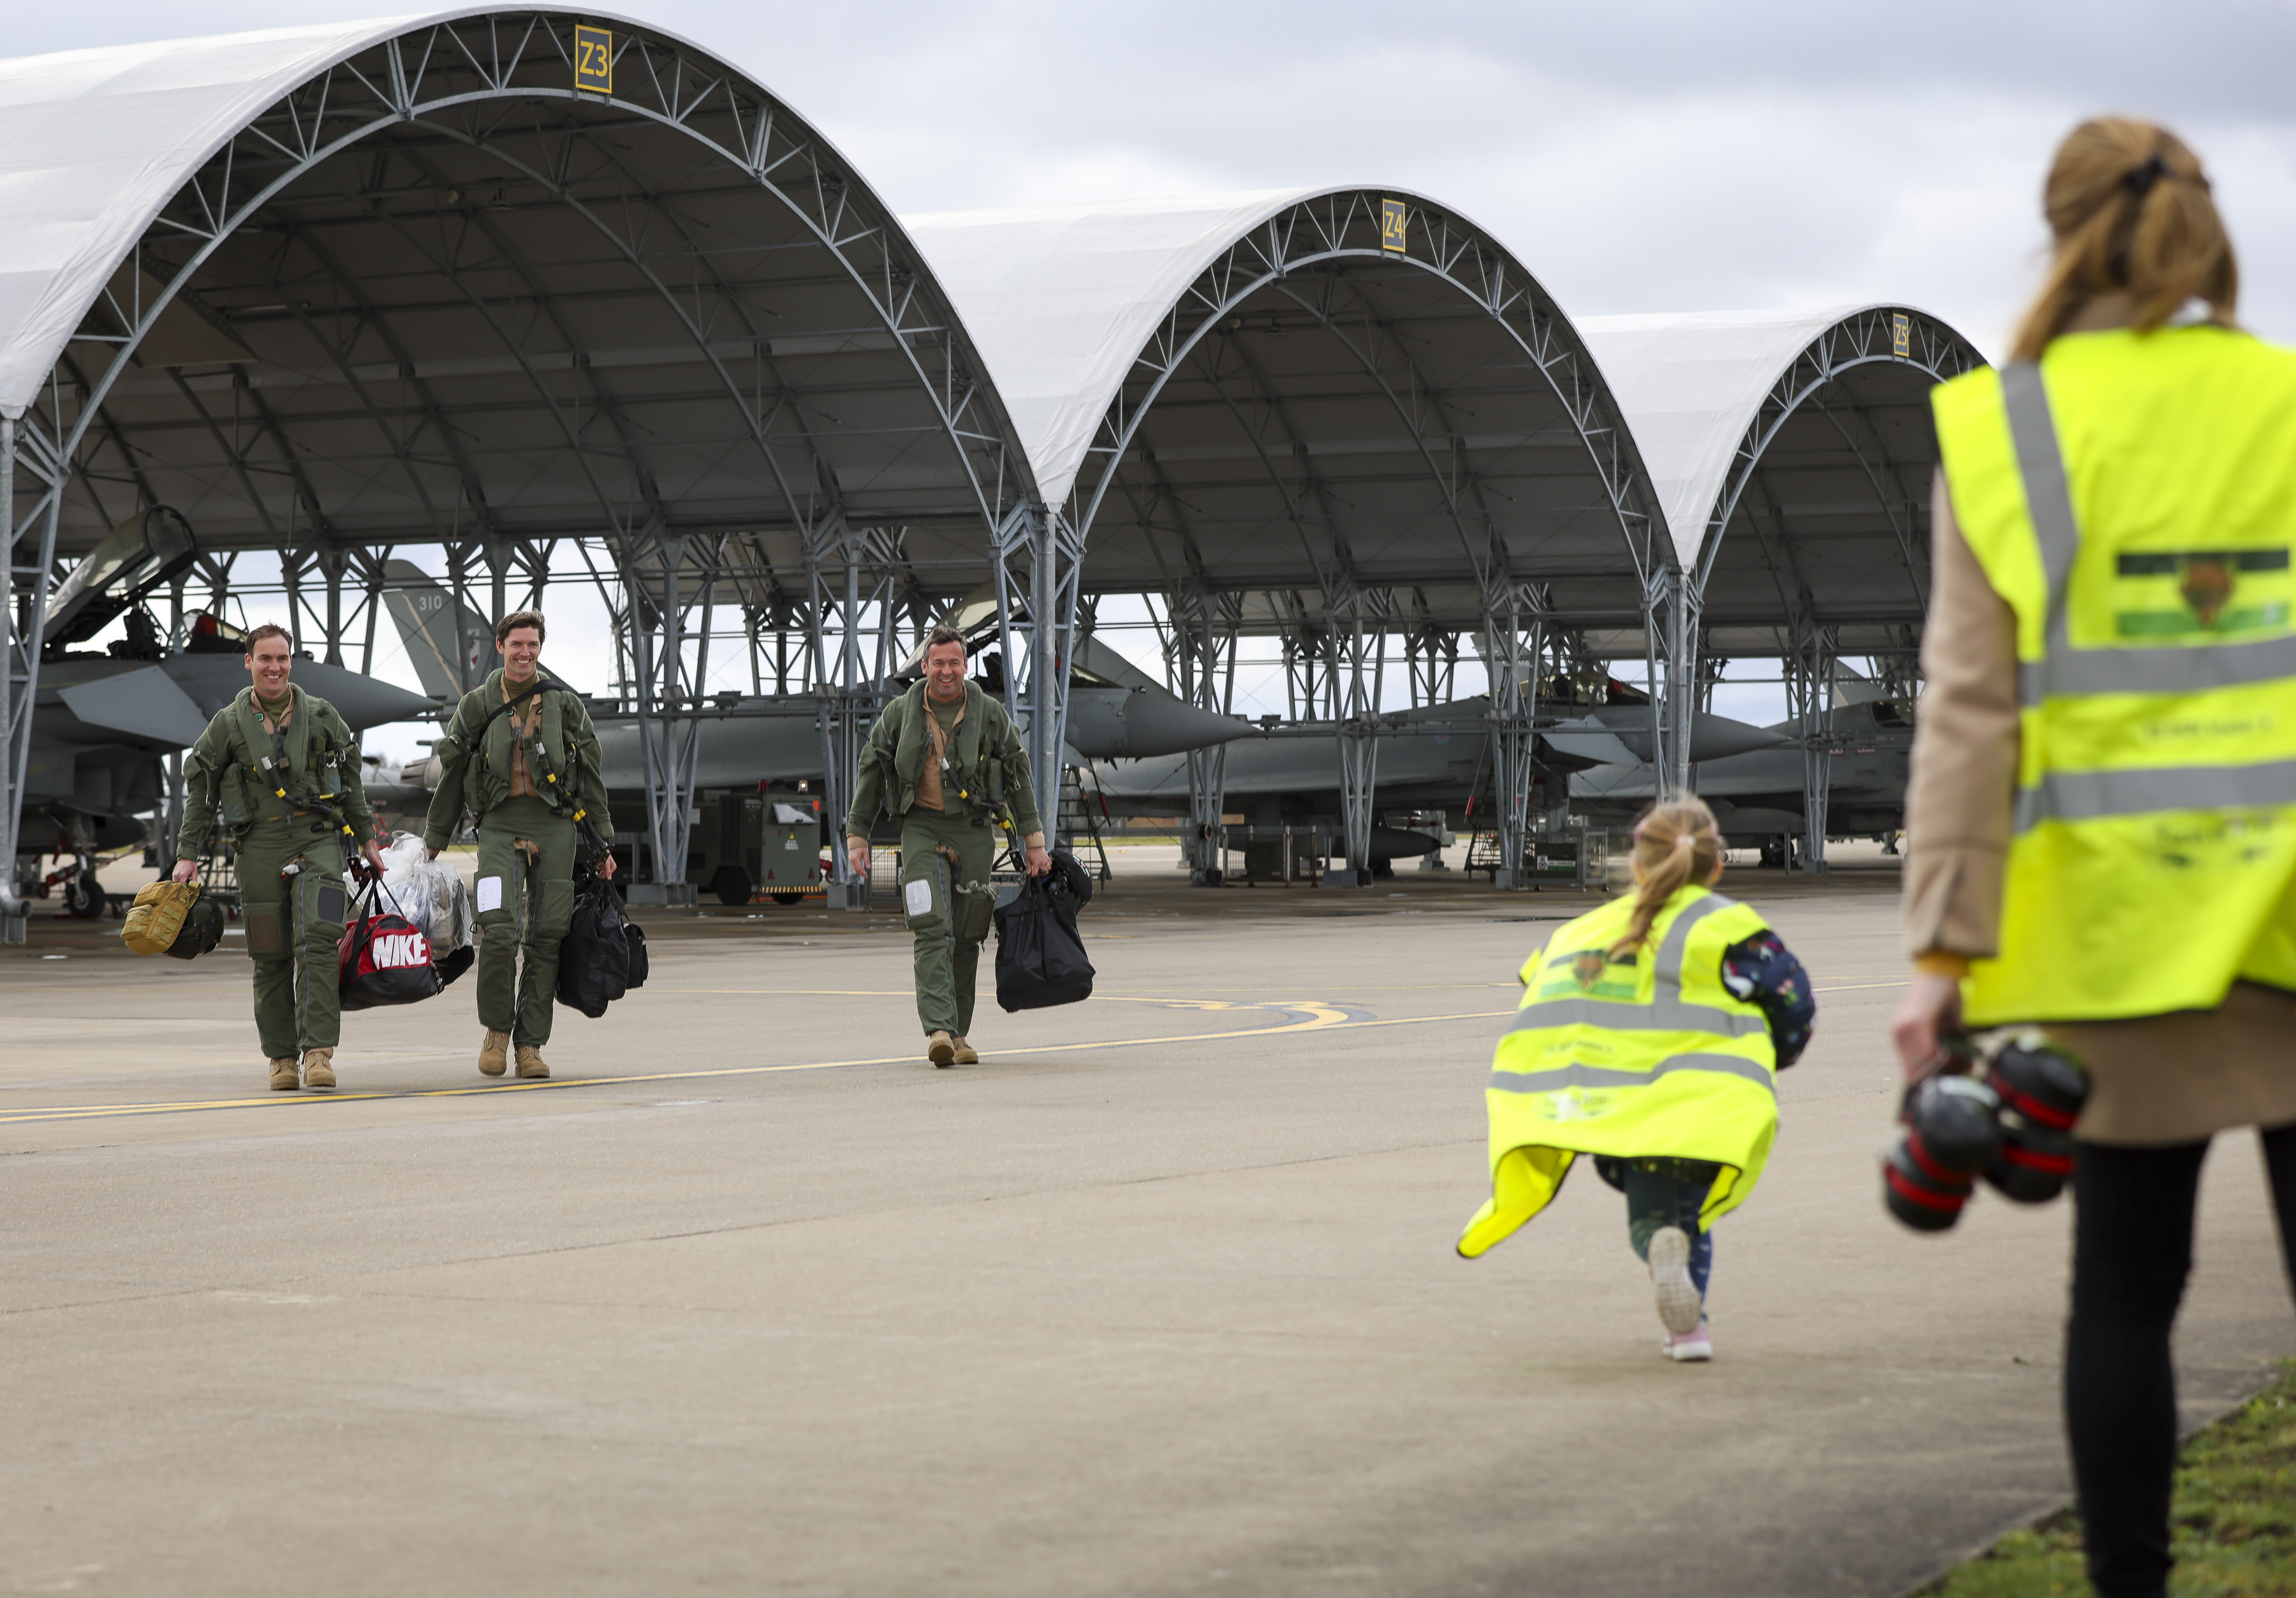 Image shows young girl running towards RAF aviators walking across the airfield, by a Typhoon aircraft.